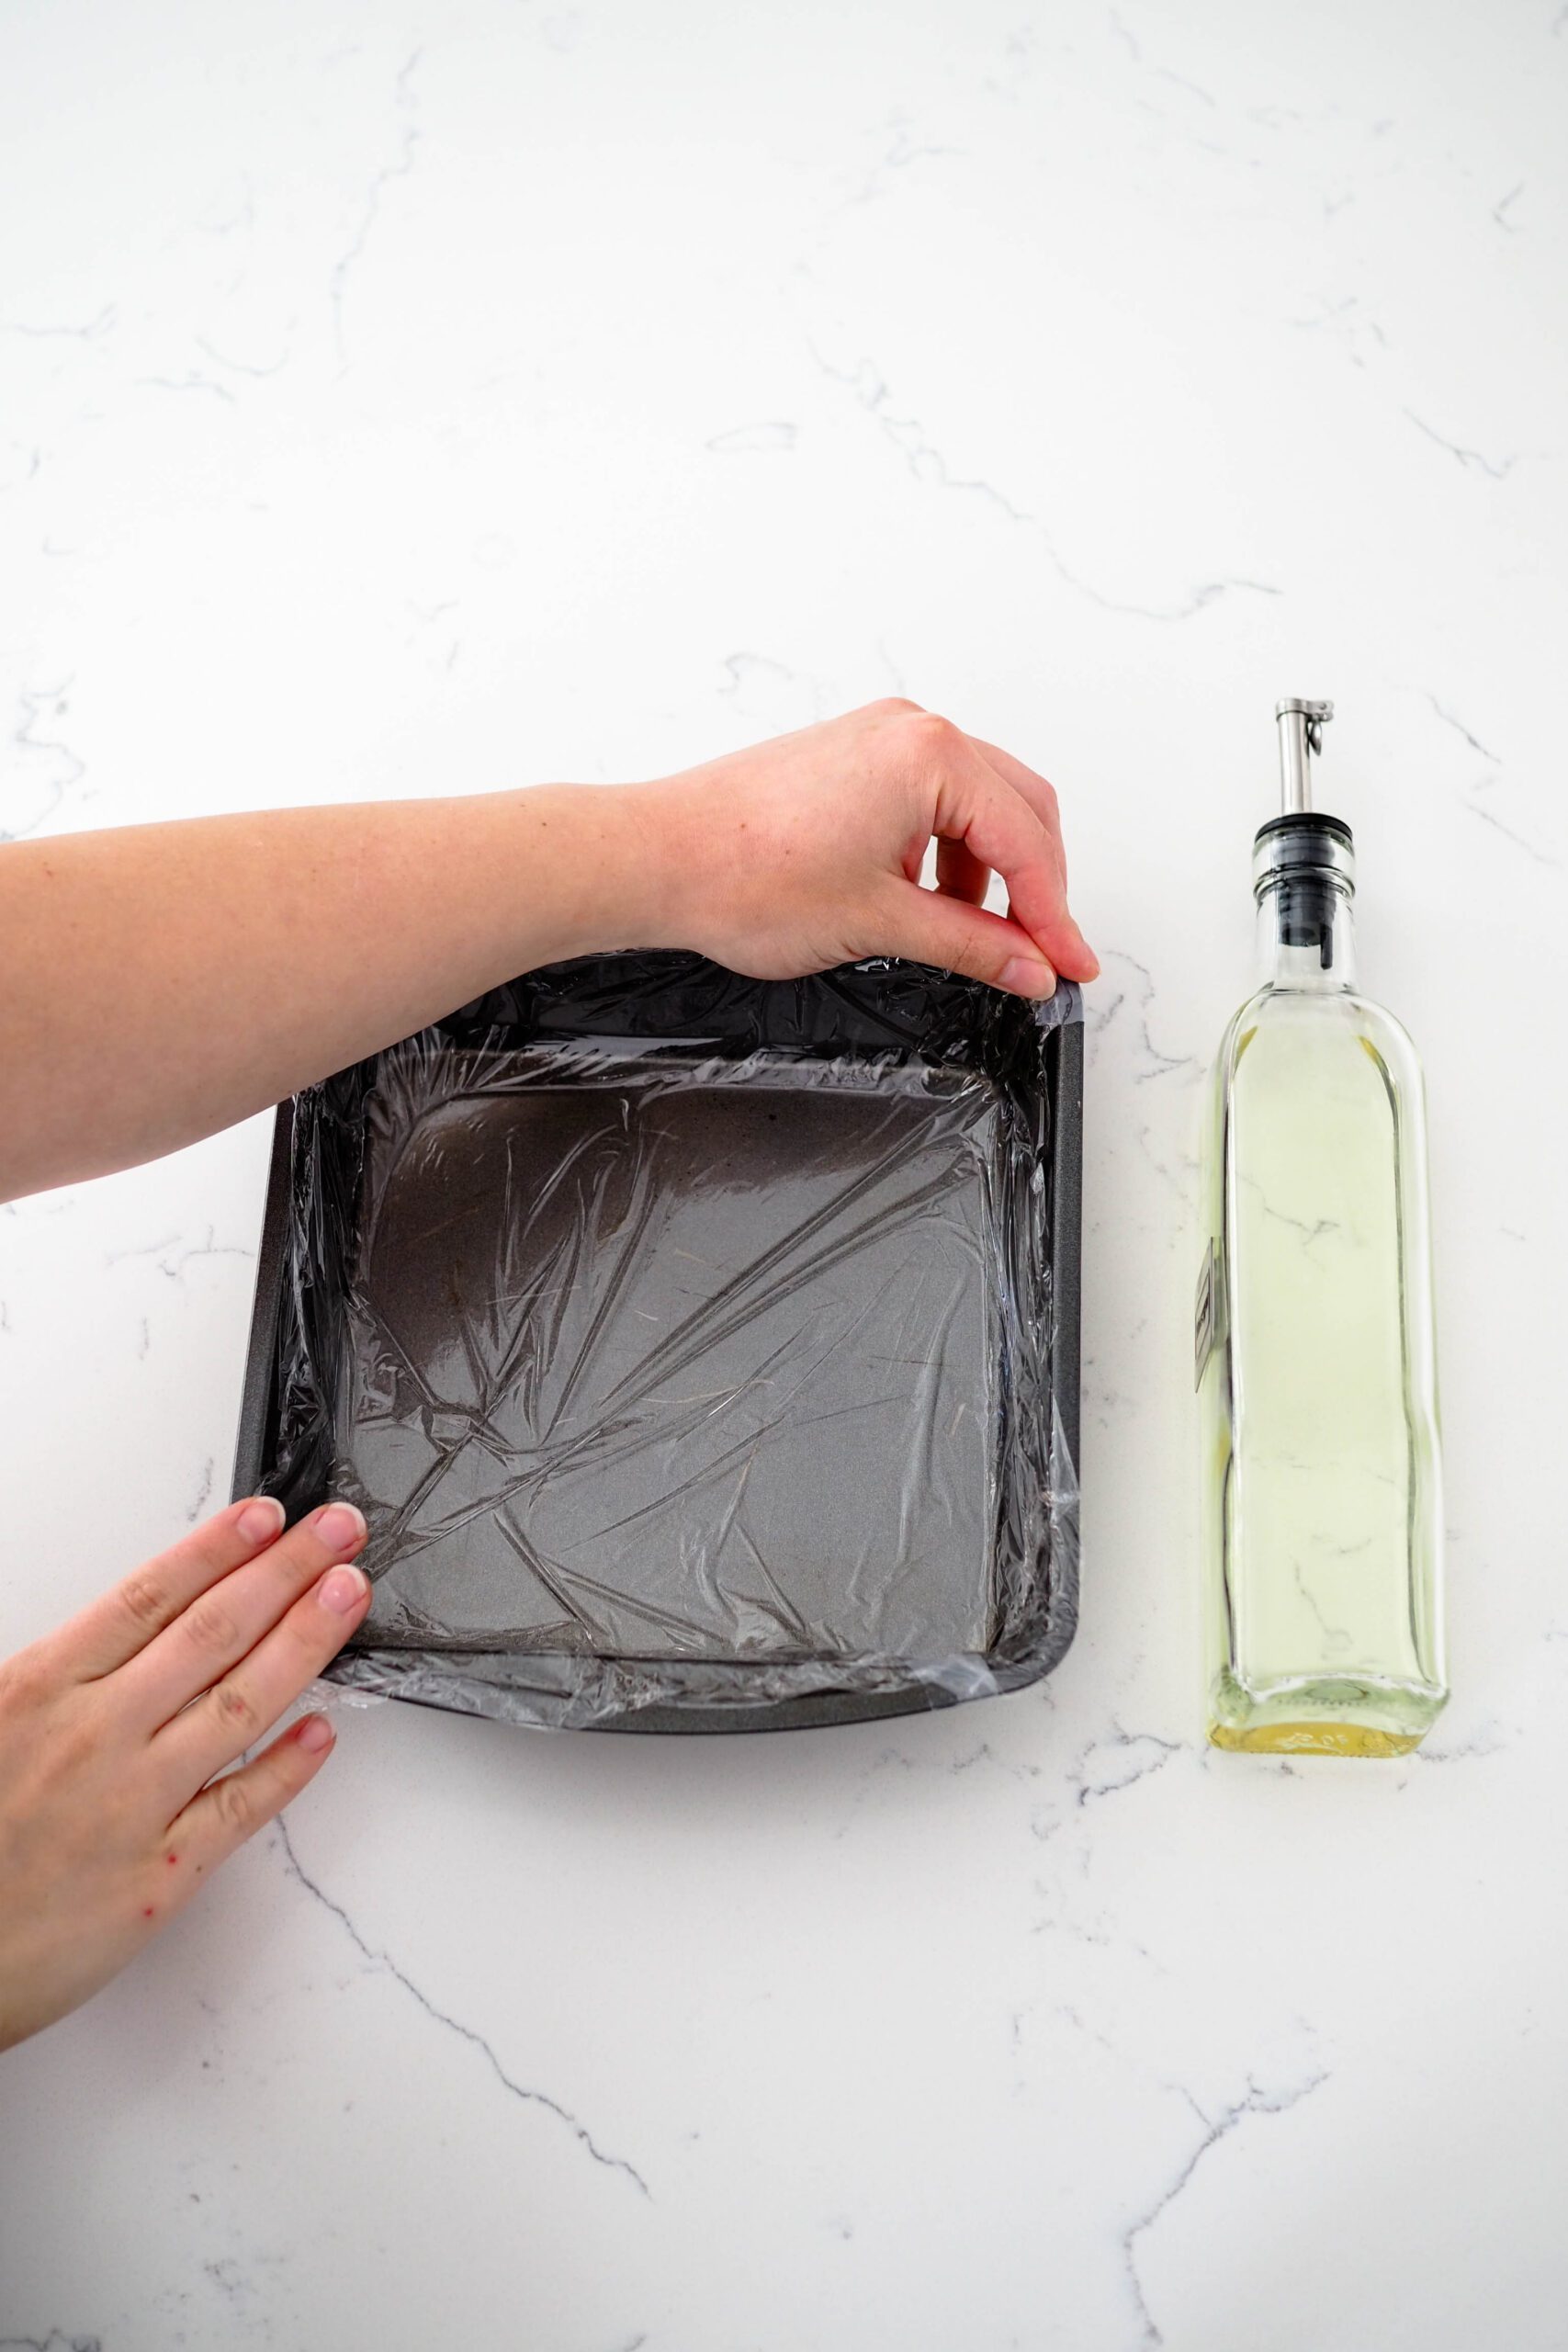 Two hands prepare a baking pan lined with plastic wrap.